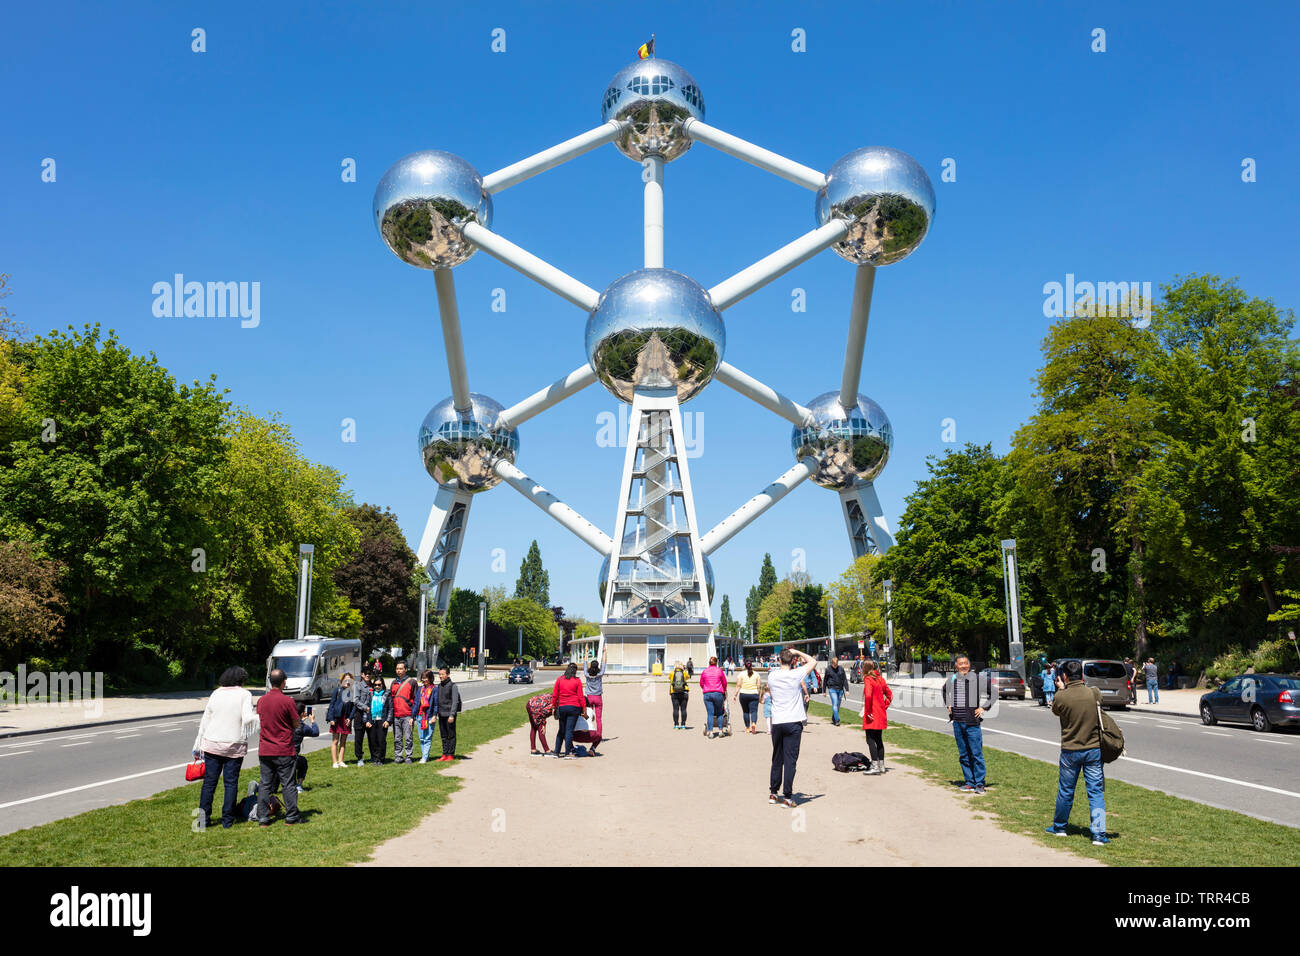 Brussels Atomium Brussels tourists taking photographs at the atomium brussels Belgium Eu Europe Stock Photo